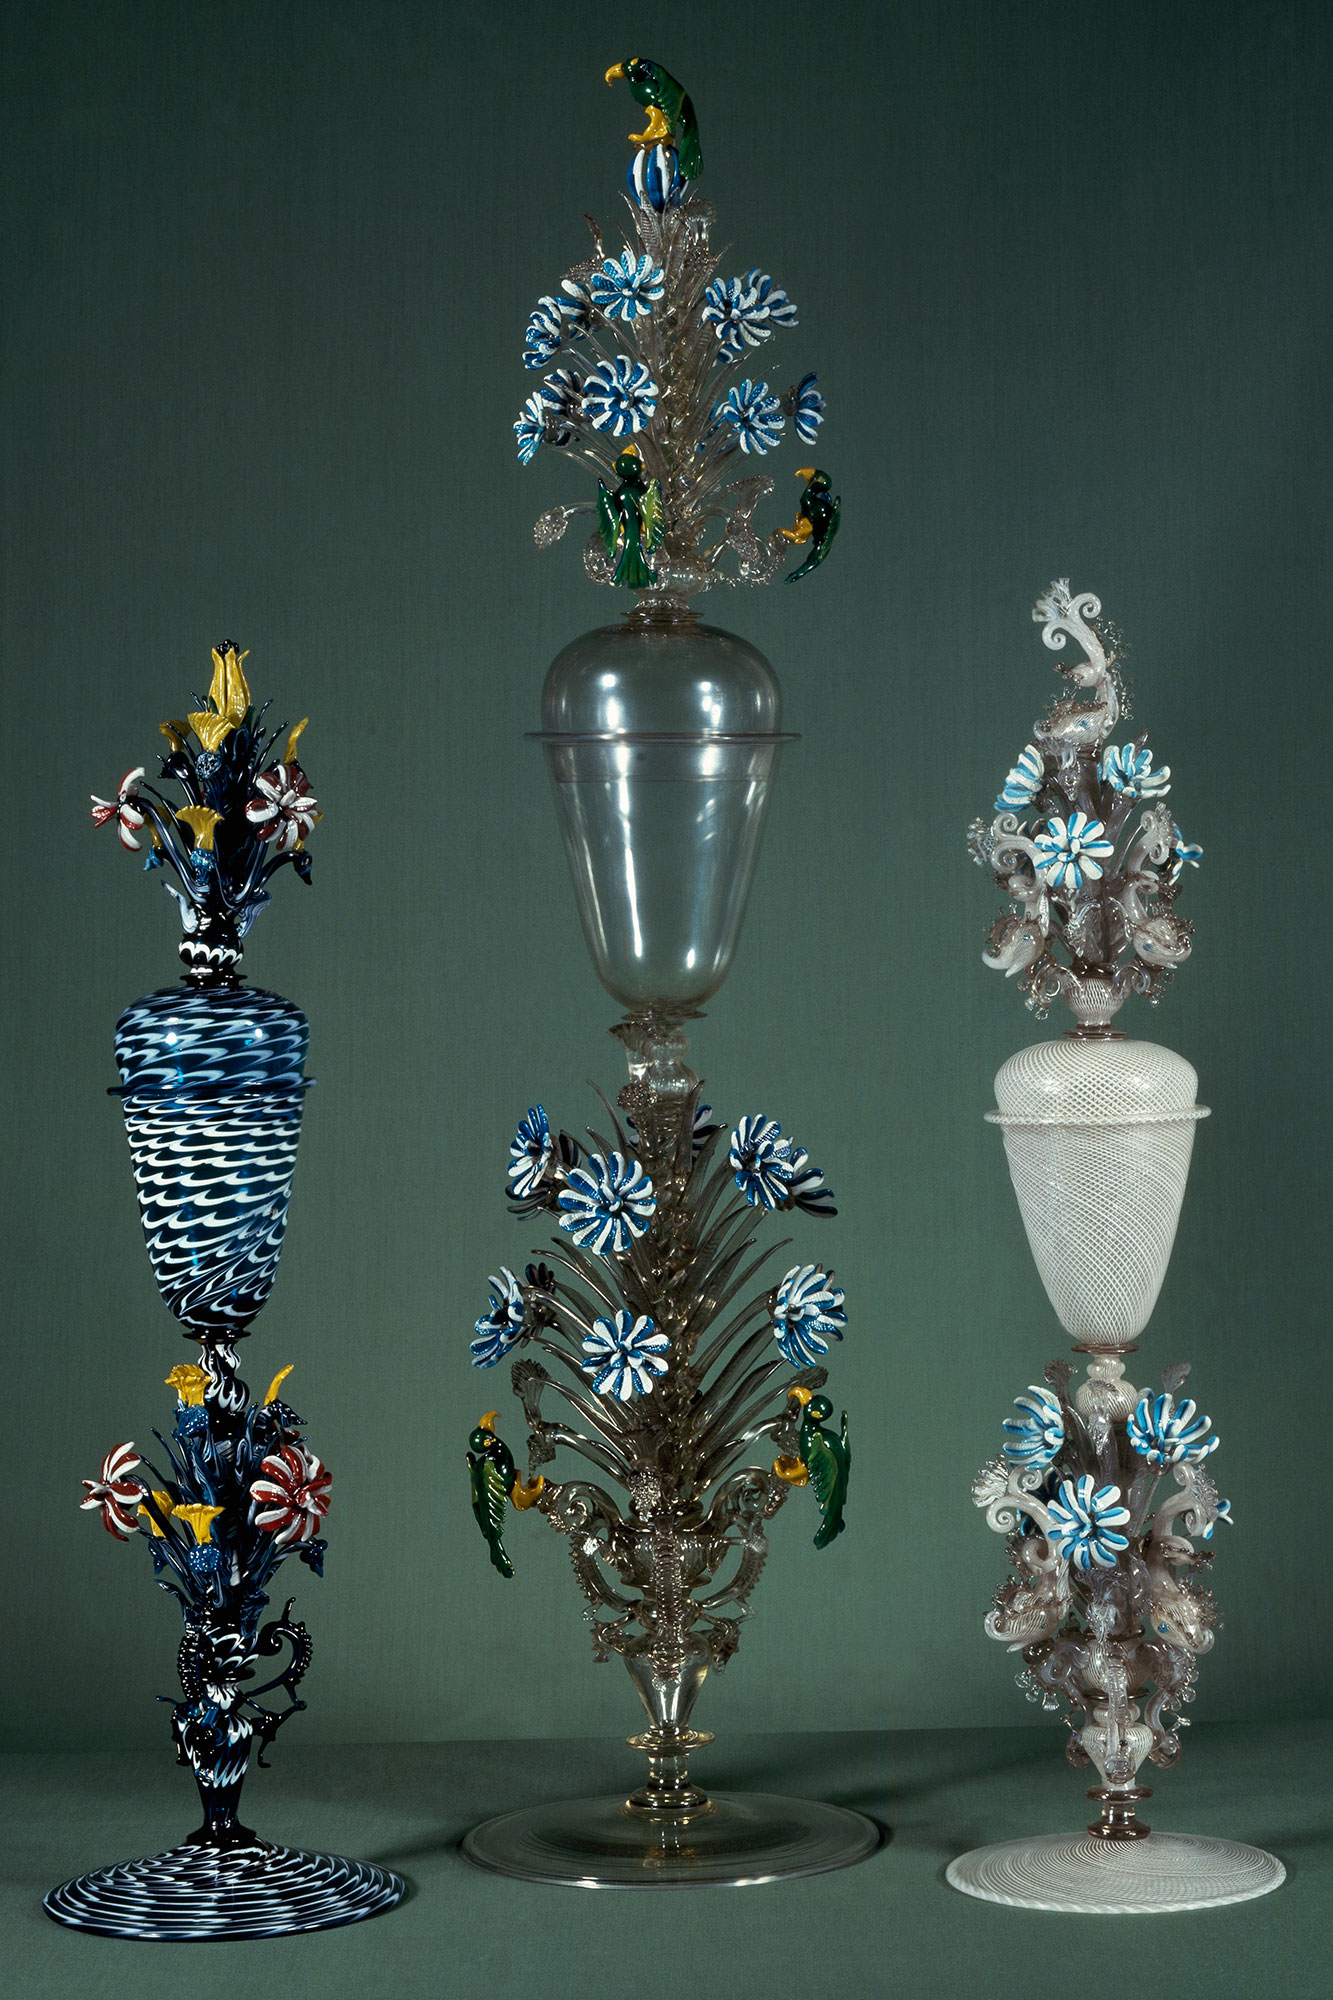 Three glass goblets elaborately decorated with blue and white stripes and flowers